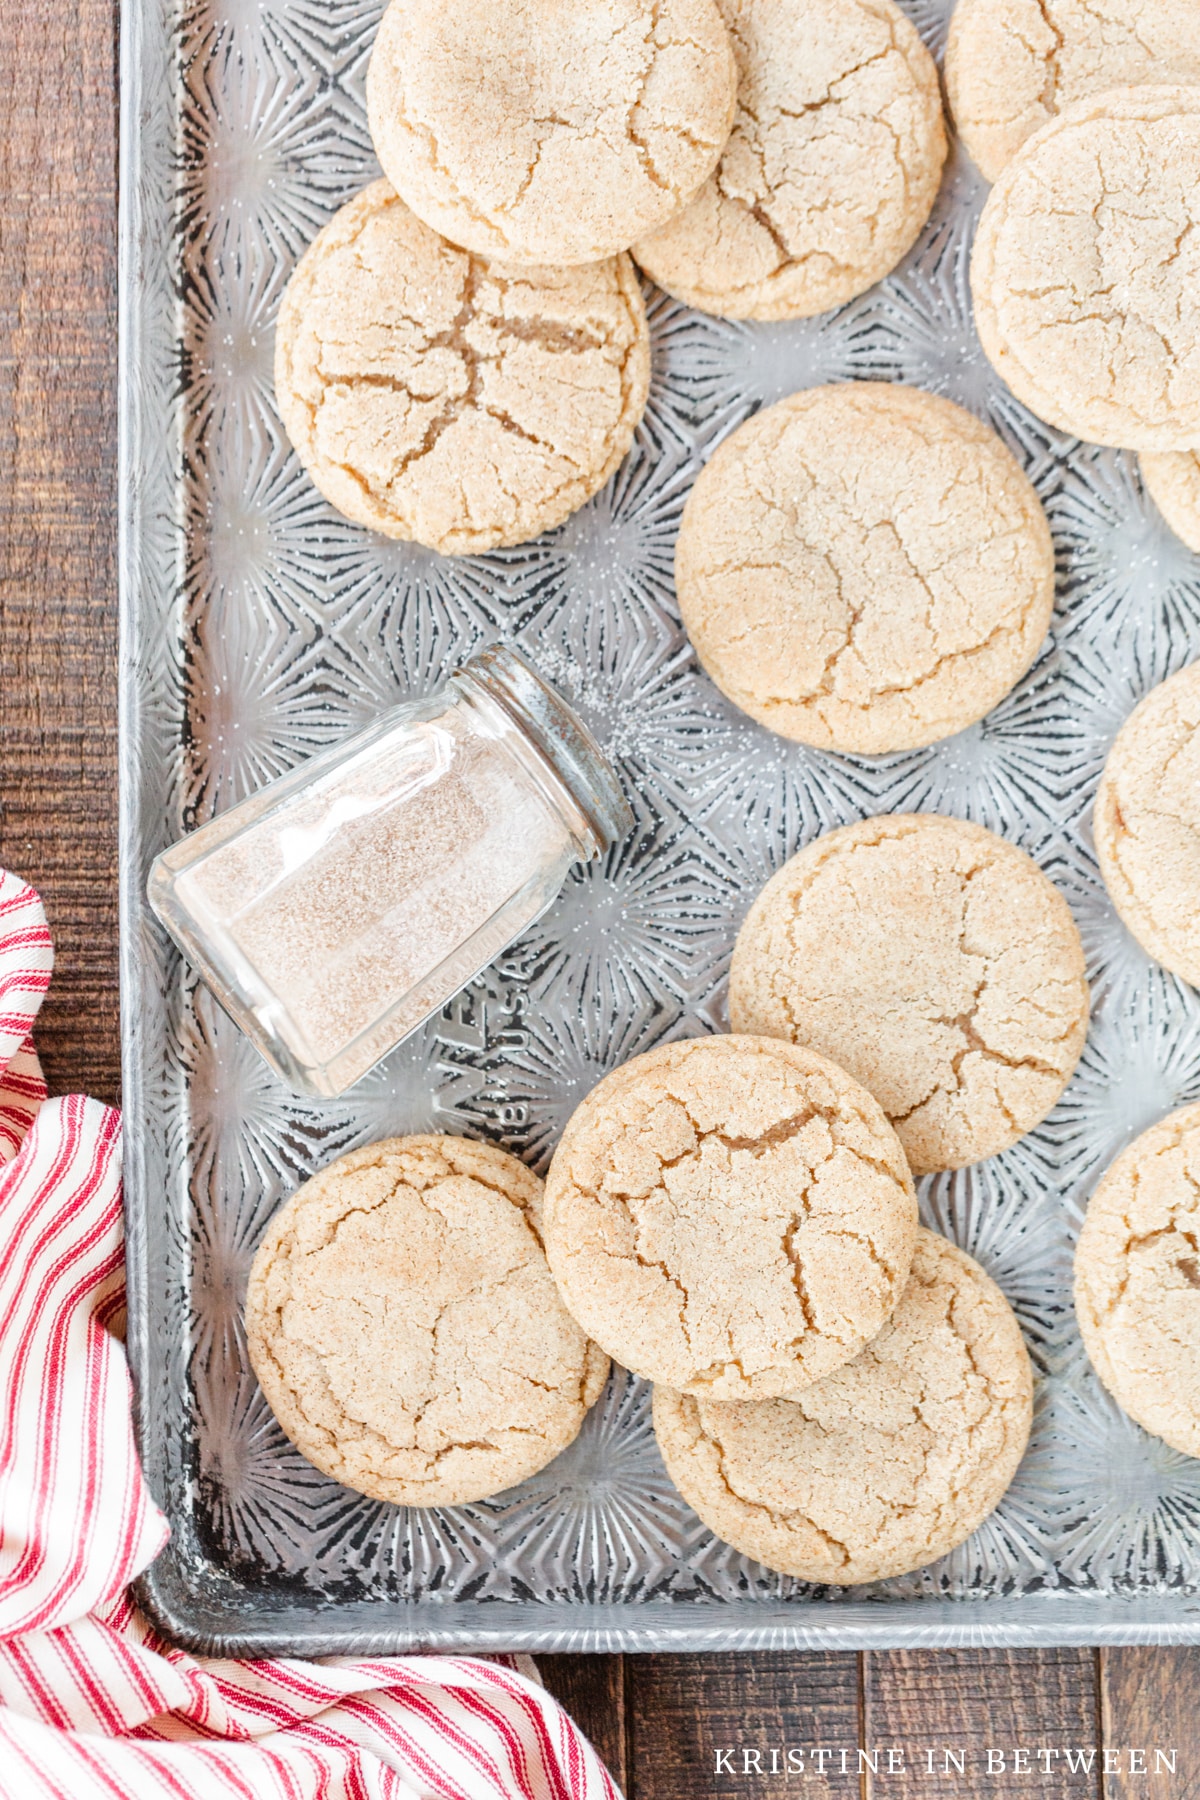 Snickerdoodle cookies laying on an old cookie sheet with a shaker full of sugar and a red striped napkin.